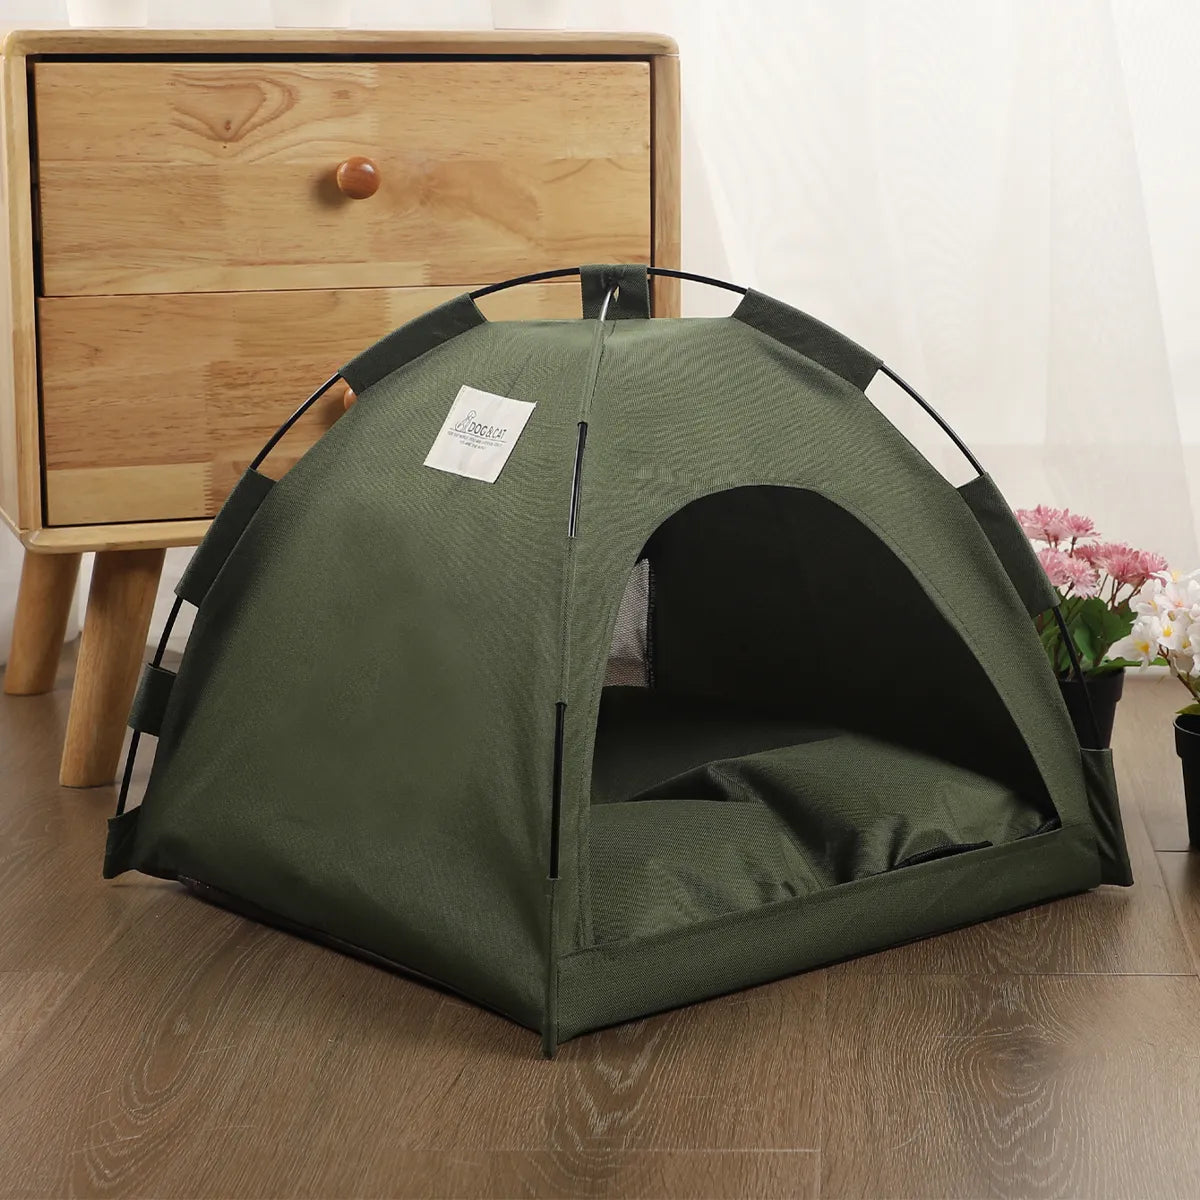 Winter Warm Tent Bed